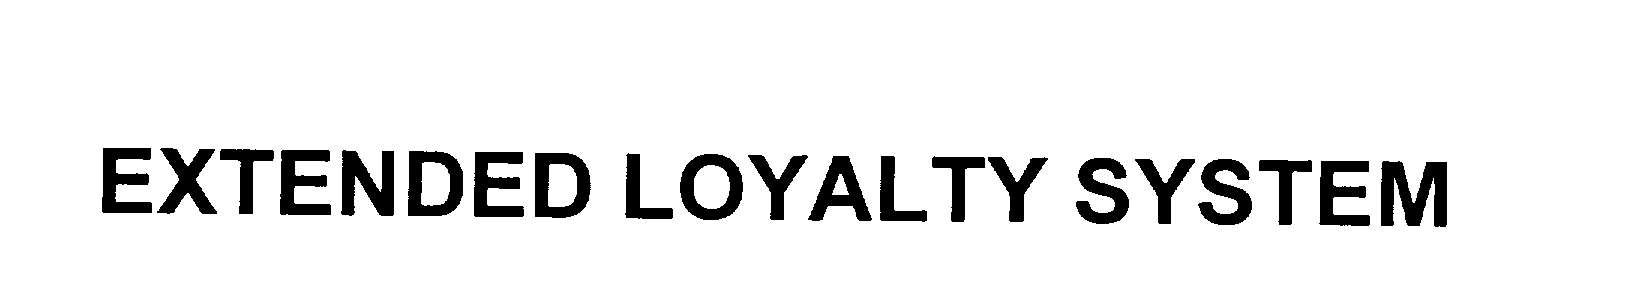  EXTENDED LOYALTY SYSTEM